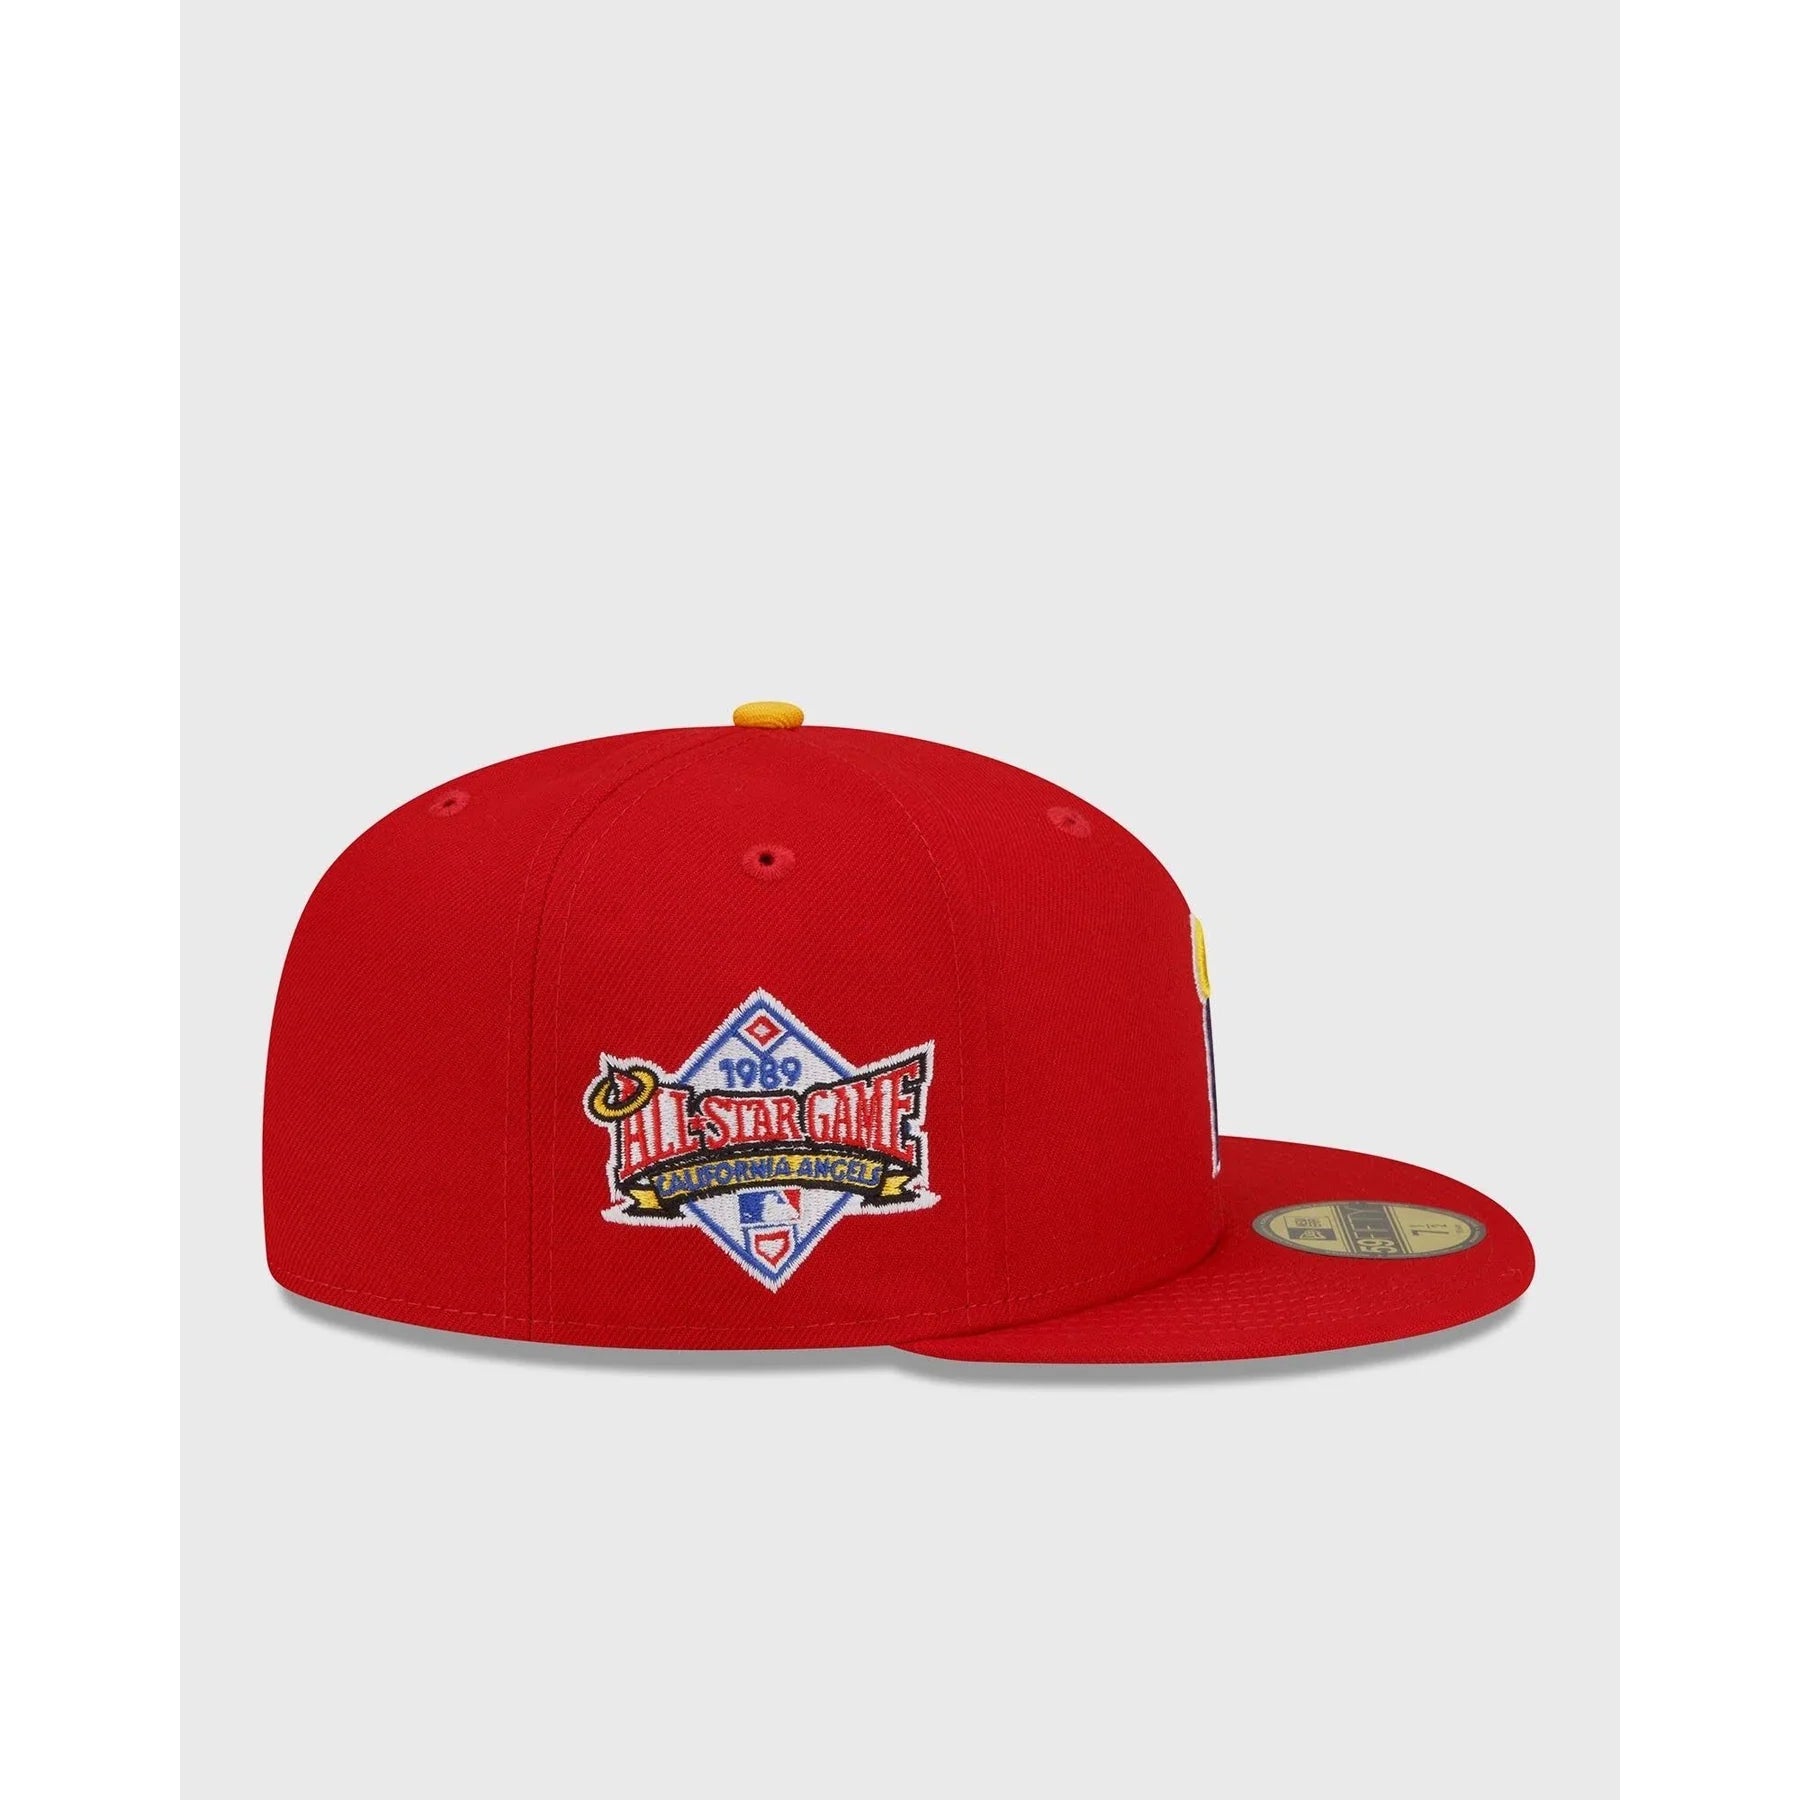 NEW ERA X JUST DON LOS ANGELES ANGELS FITTED CAP - RepKings